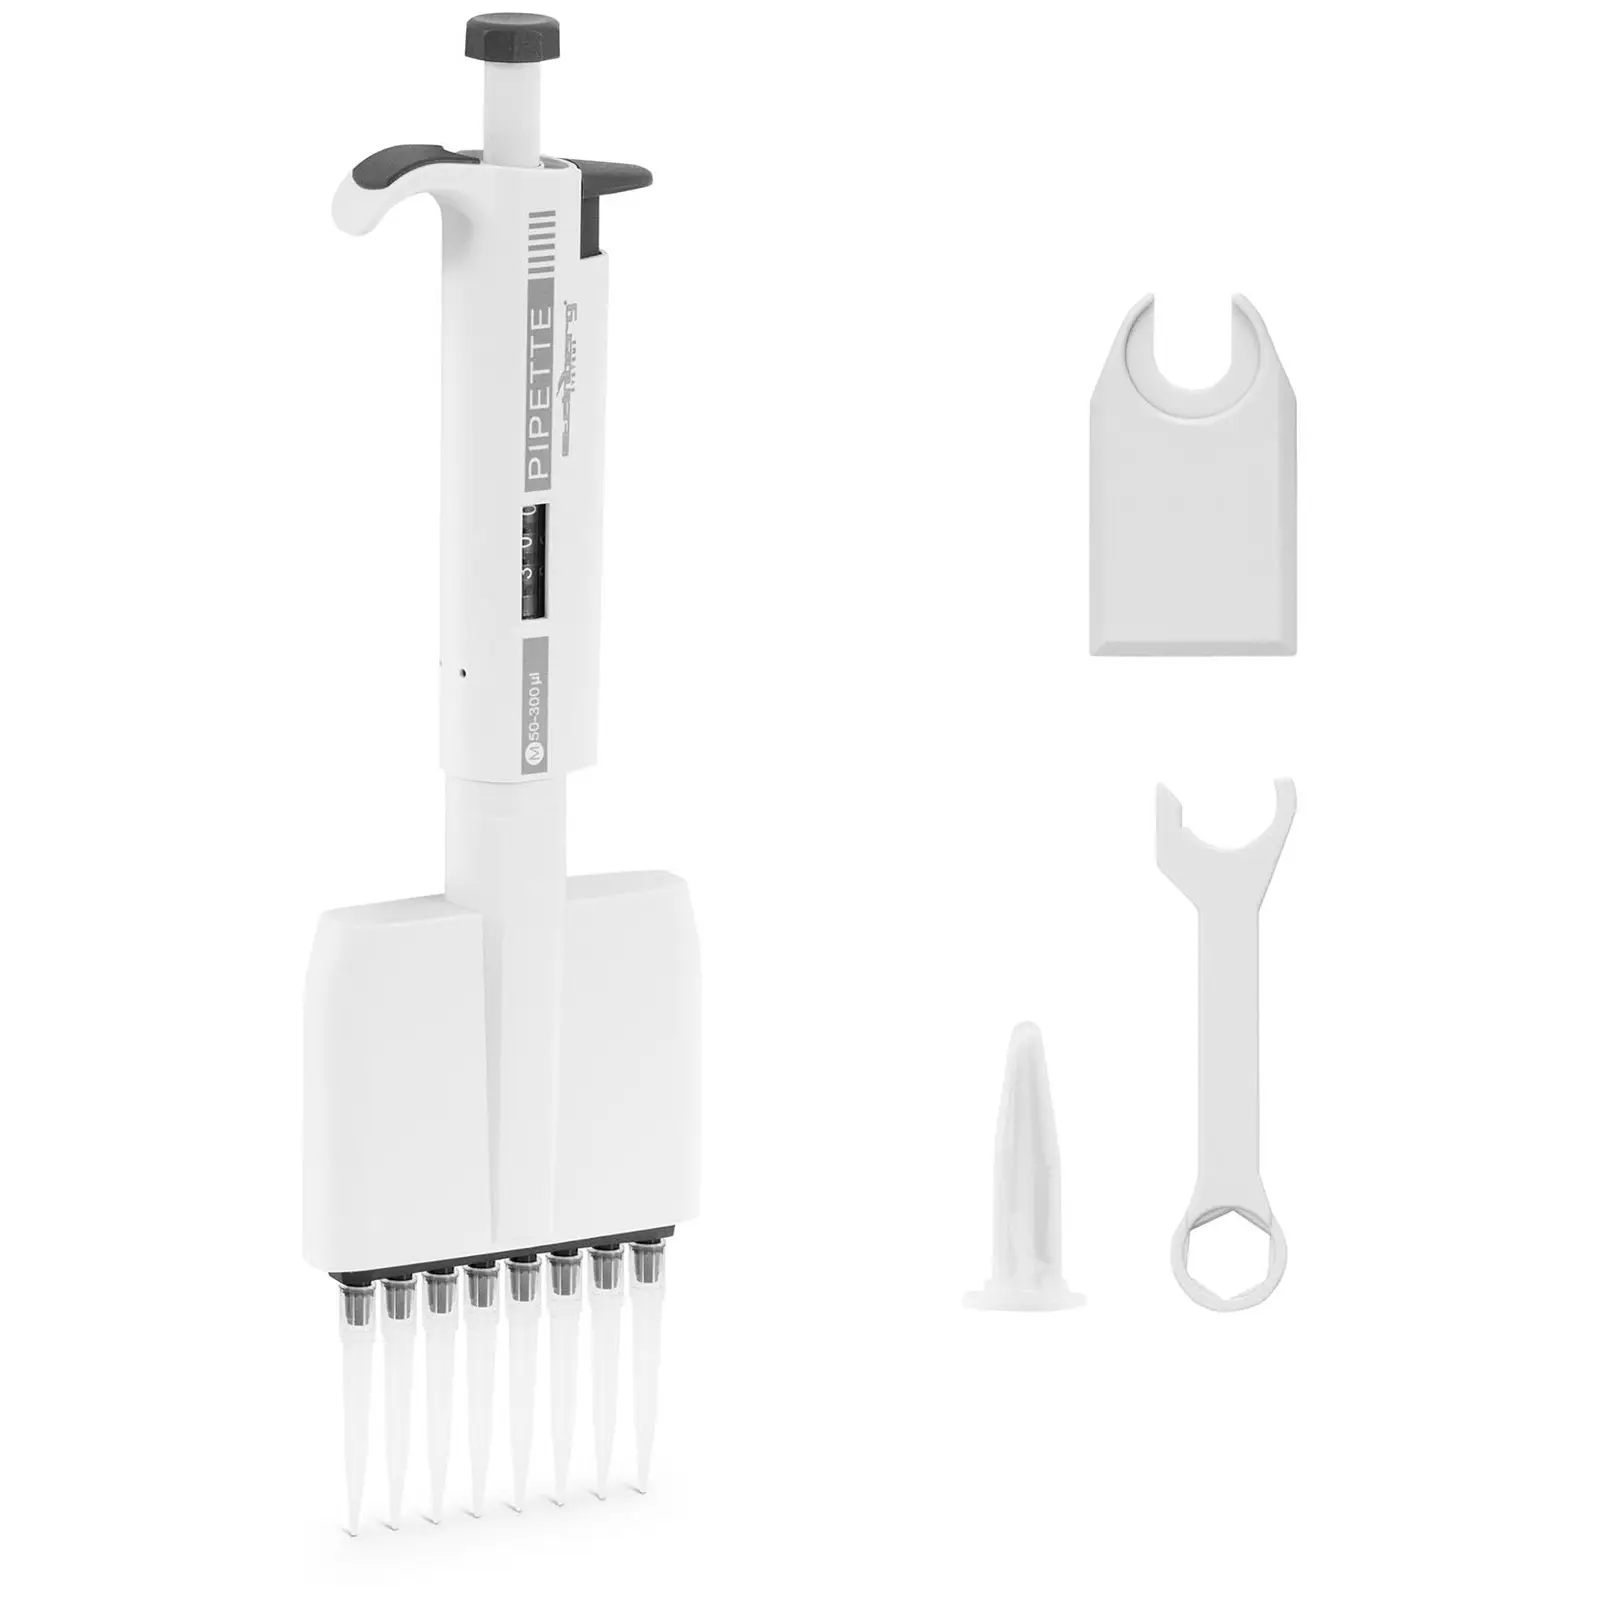 Multichannel pipette - for 8 tips - 0,05 - 0,3 ml